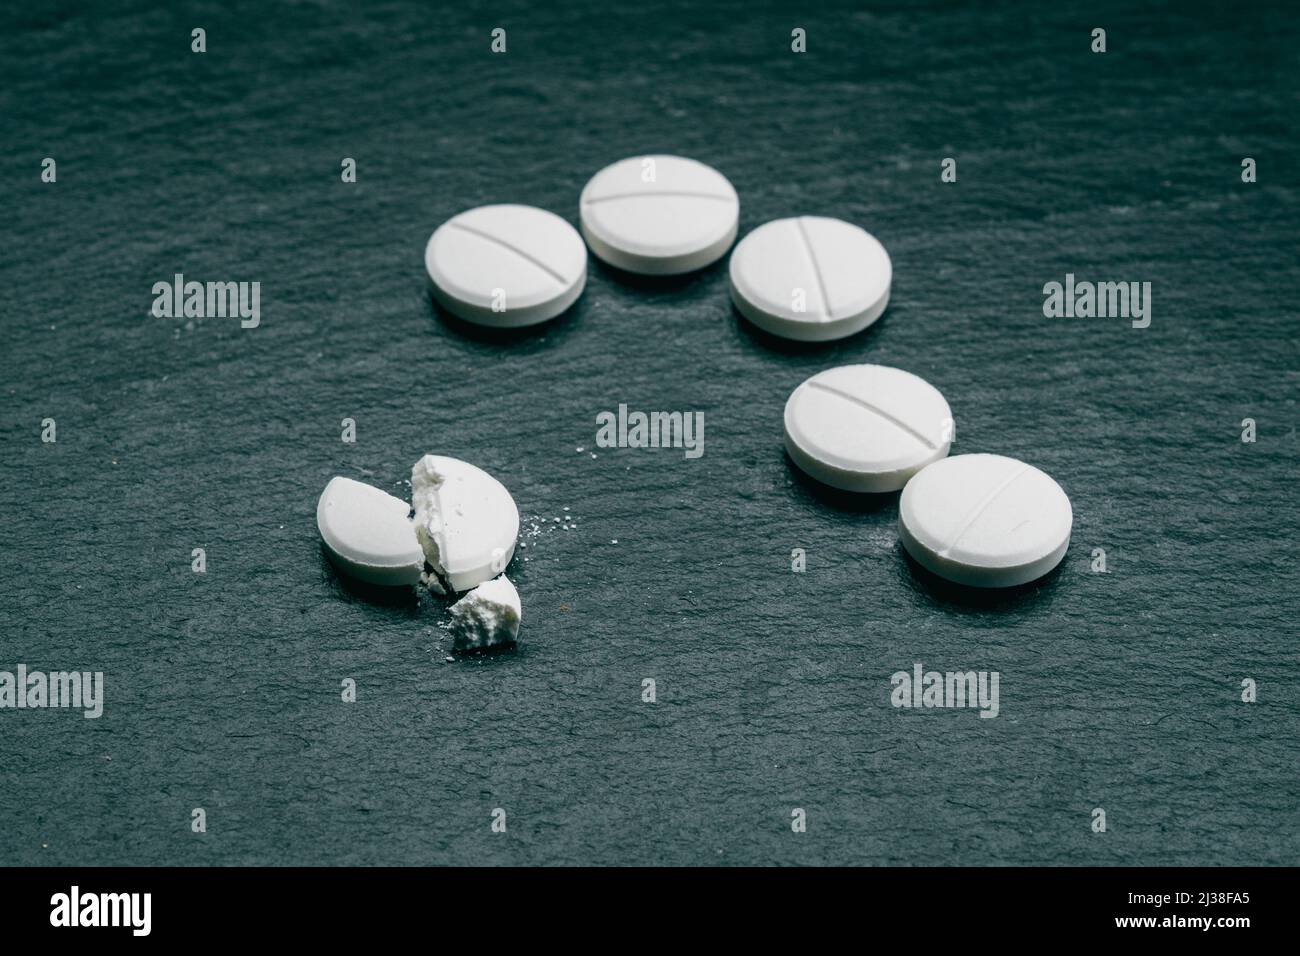 MDMA Pill known as ecstasy  E  or molly, is a psychoactive drug primarily used for recreational purposes. MDMA drugs  on black background Stock Photo